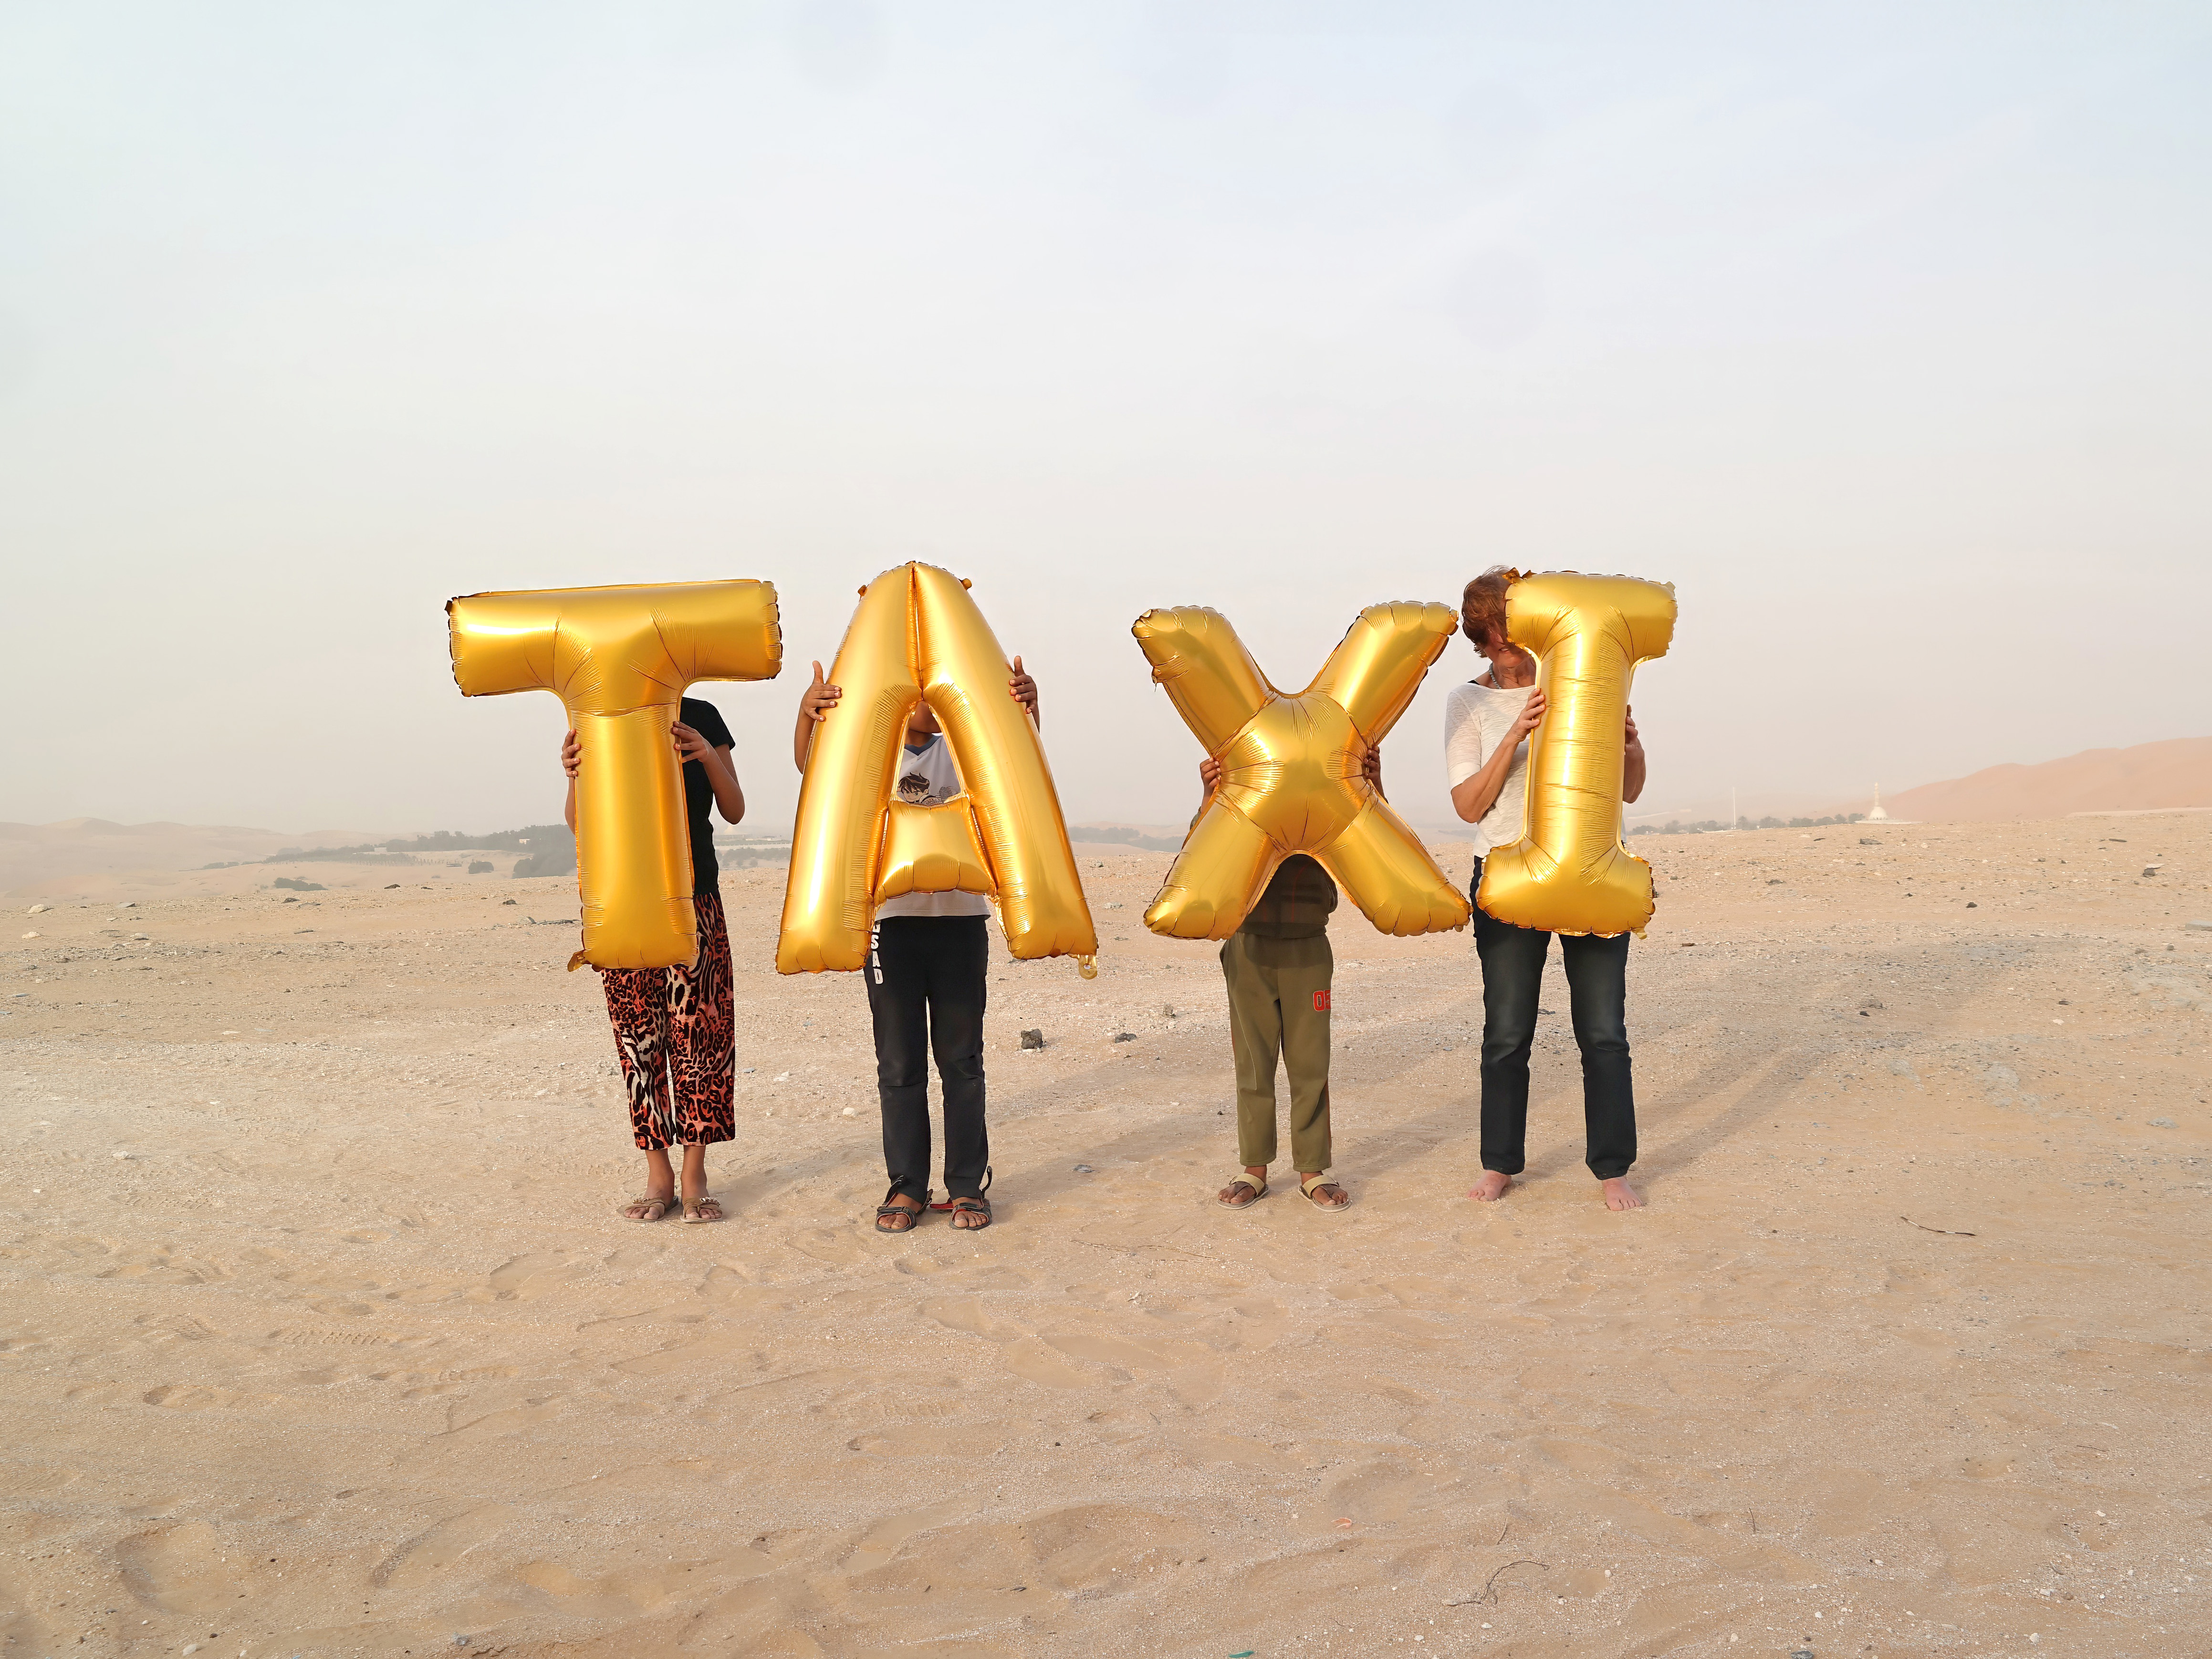 Qatar, Mesaieed, Singing Sand Dunes - Taxi, Silence was Golden, gold balloons